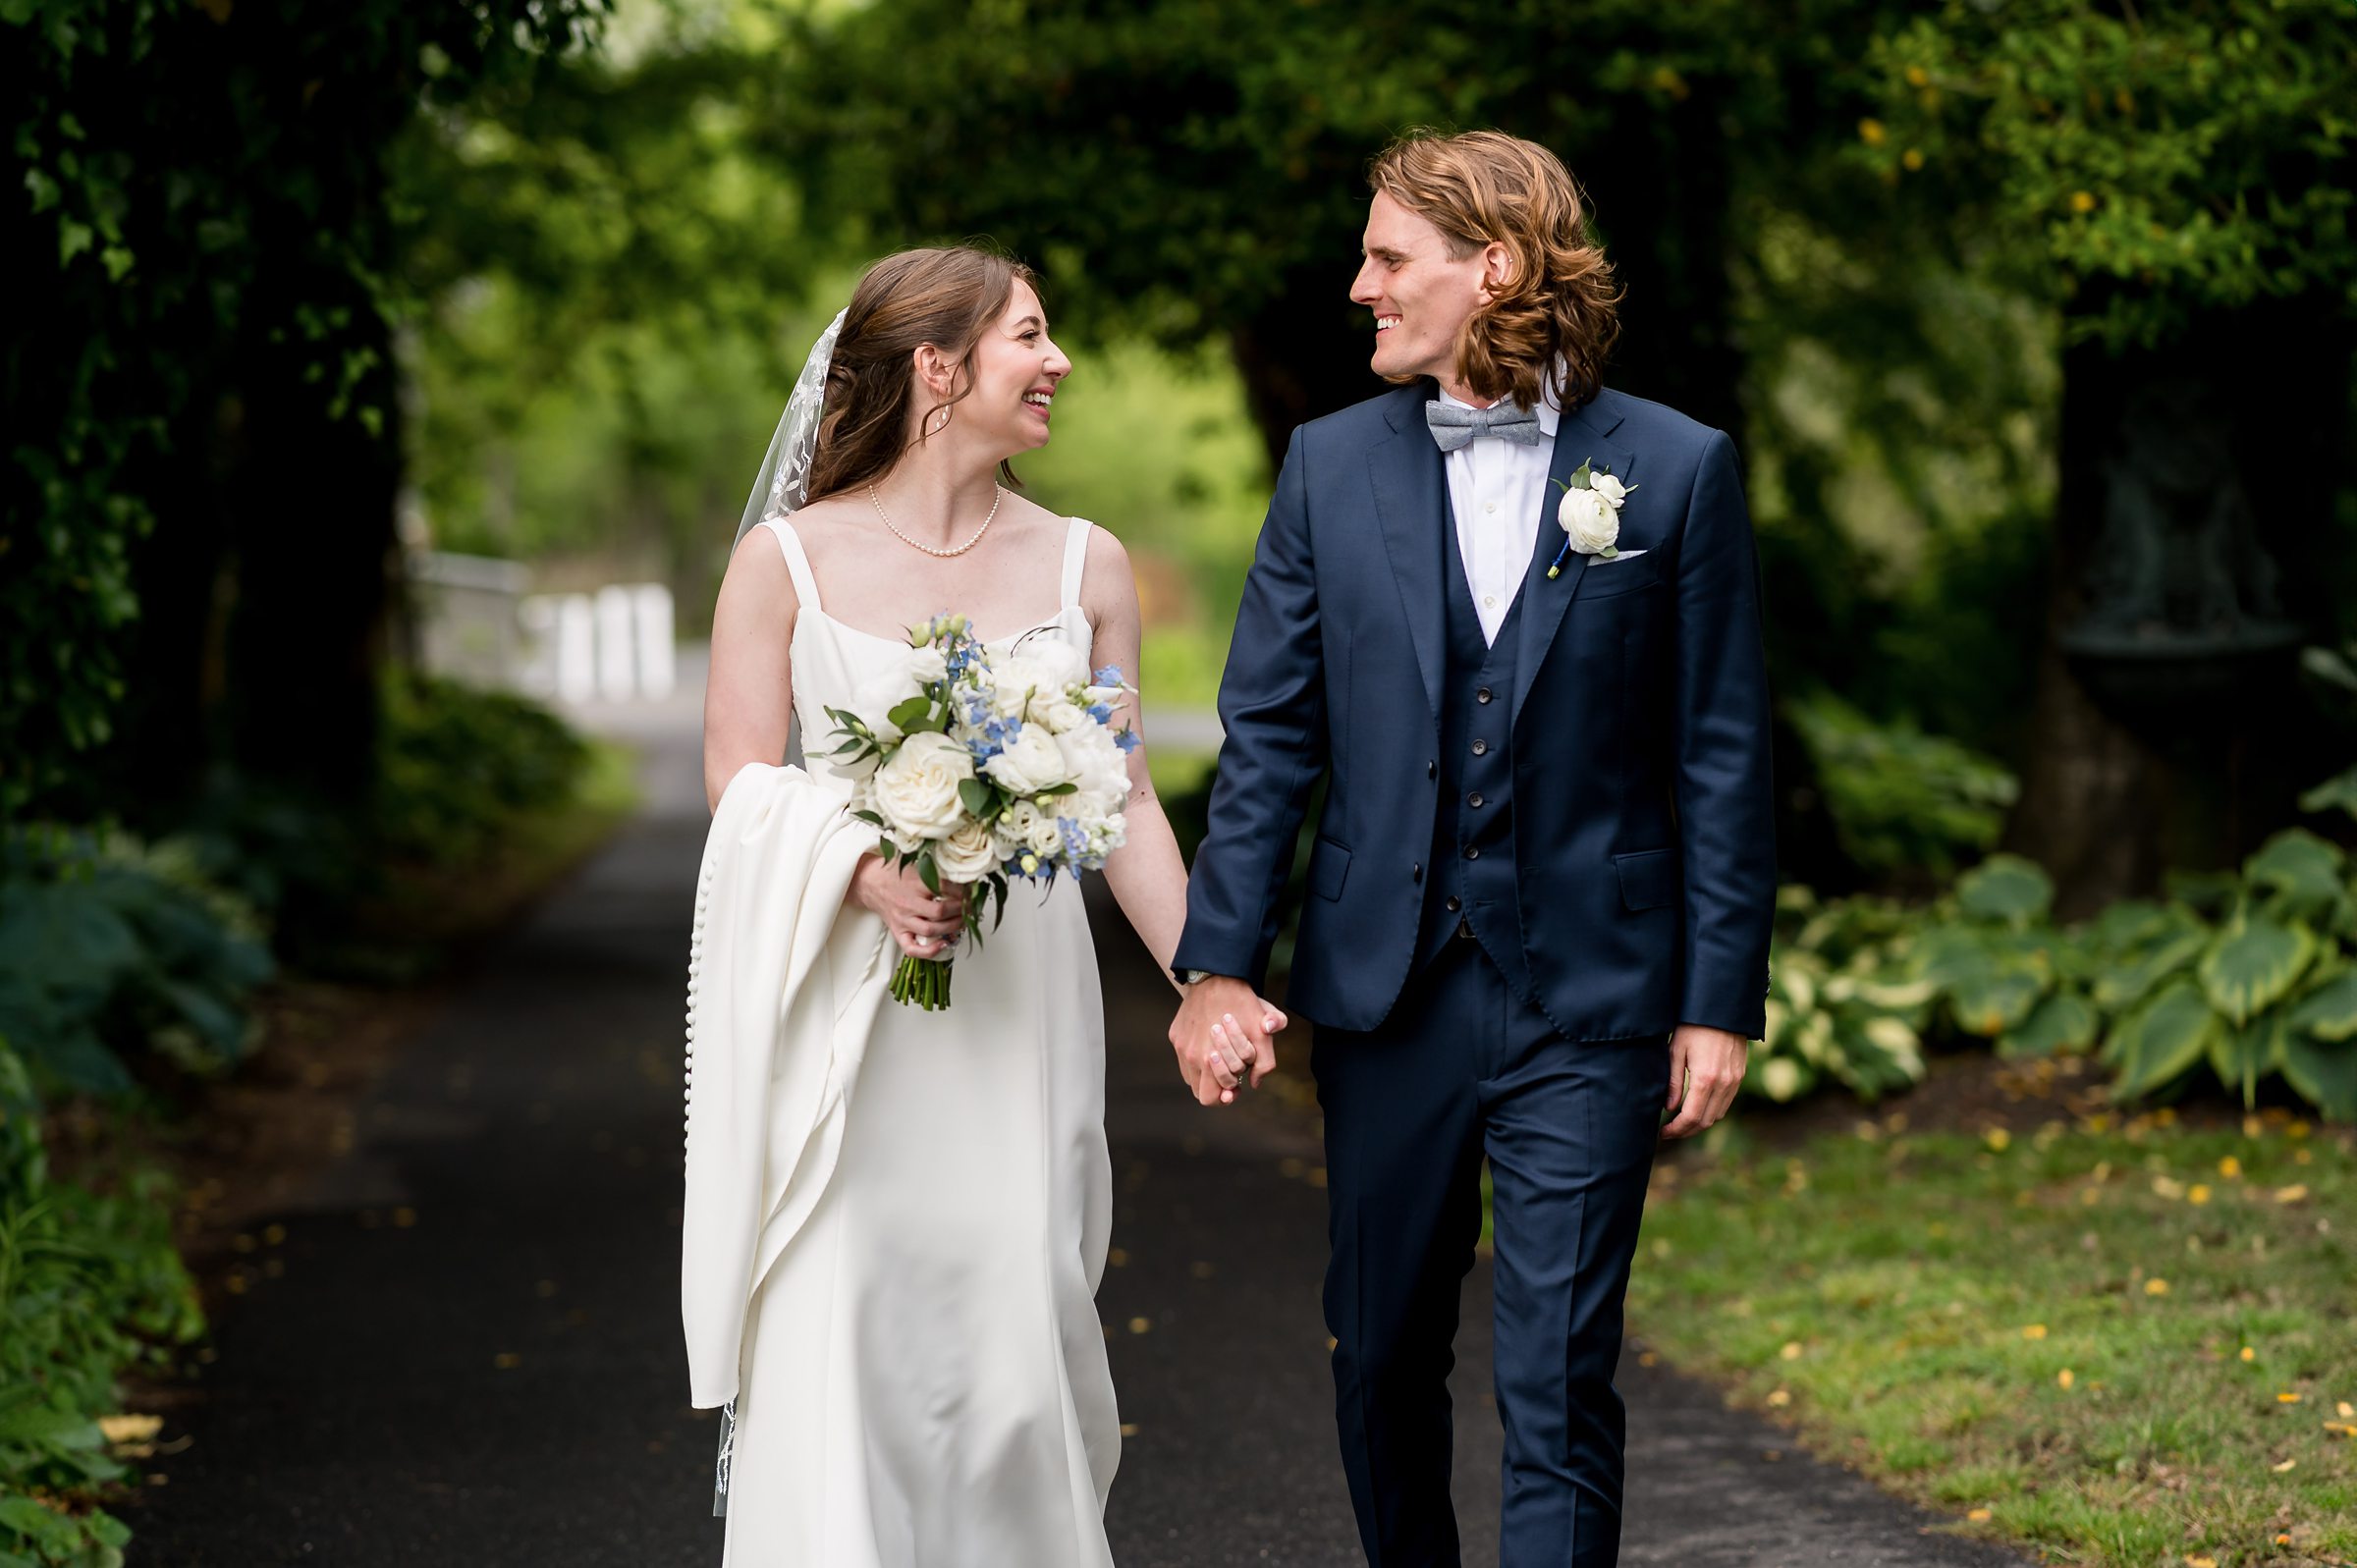 A bride and groom walk hand-in-hand on a pathway surrounded by greenery. The bride holds a bouquet and smiles at the groom, who wears a dark suit and bow tie. Both appear happy and relaxed.